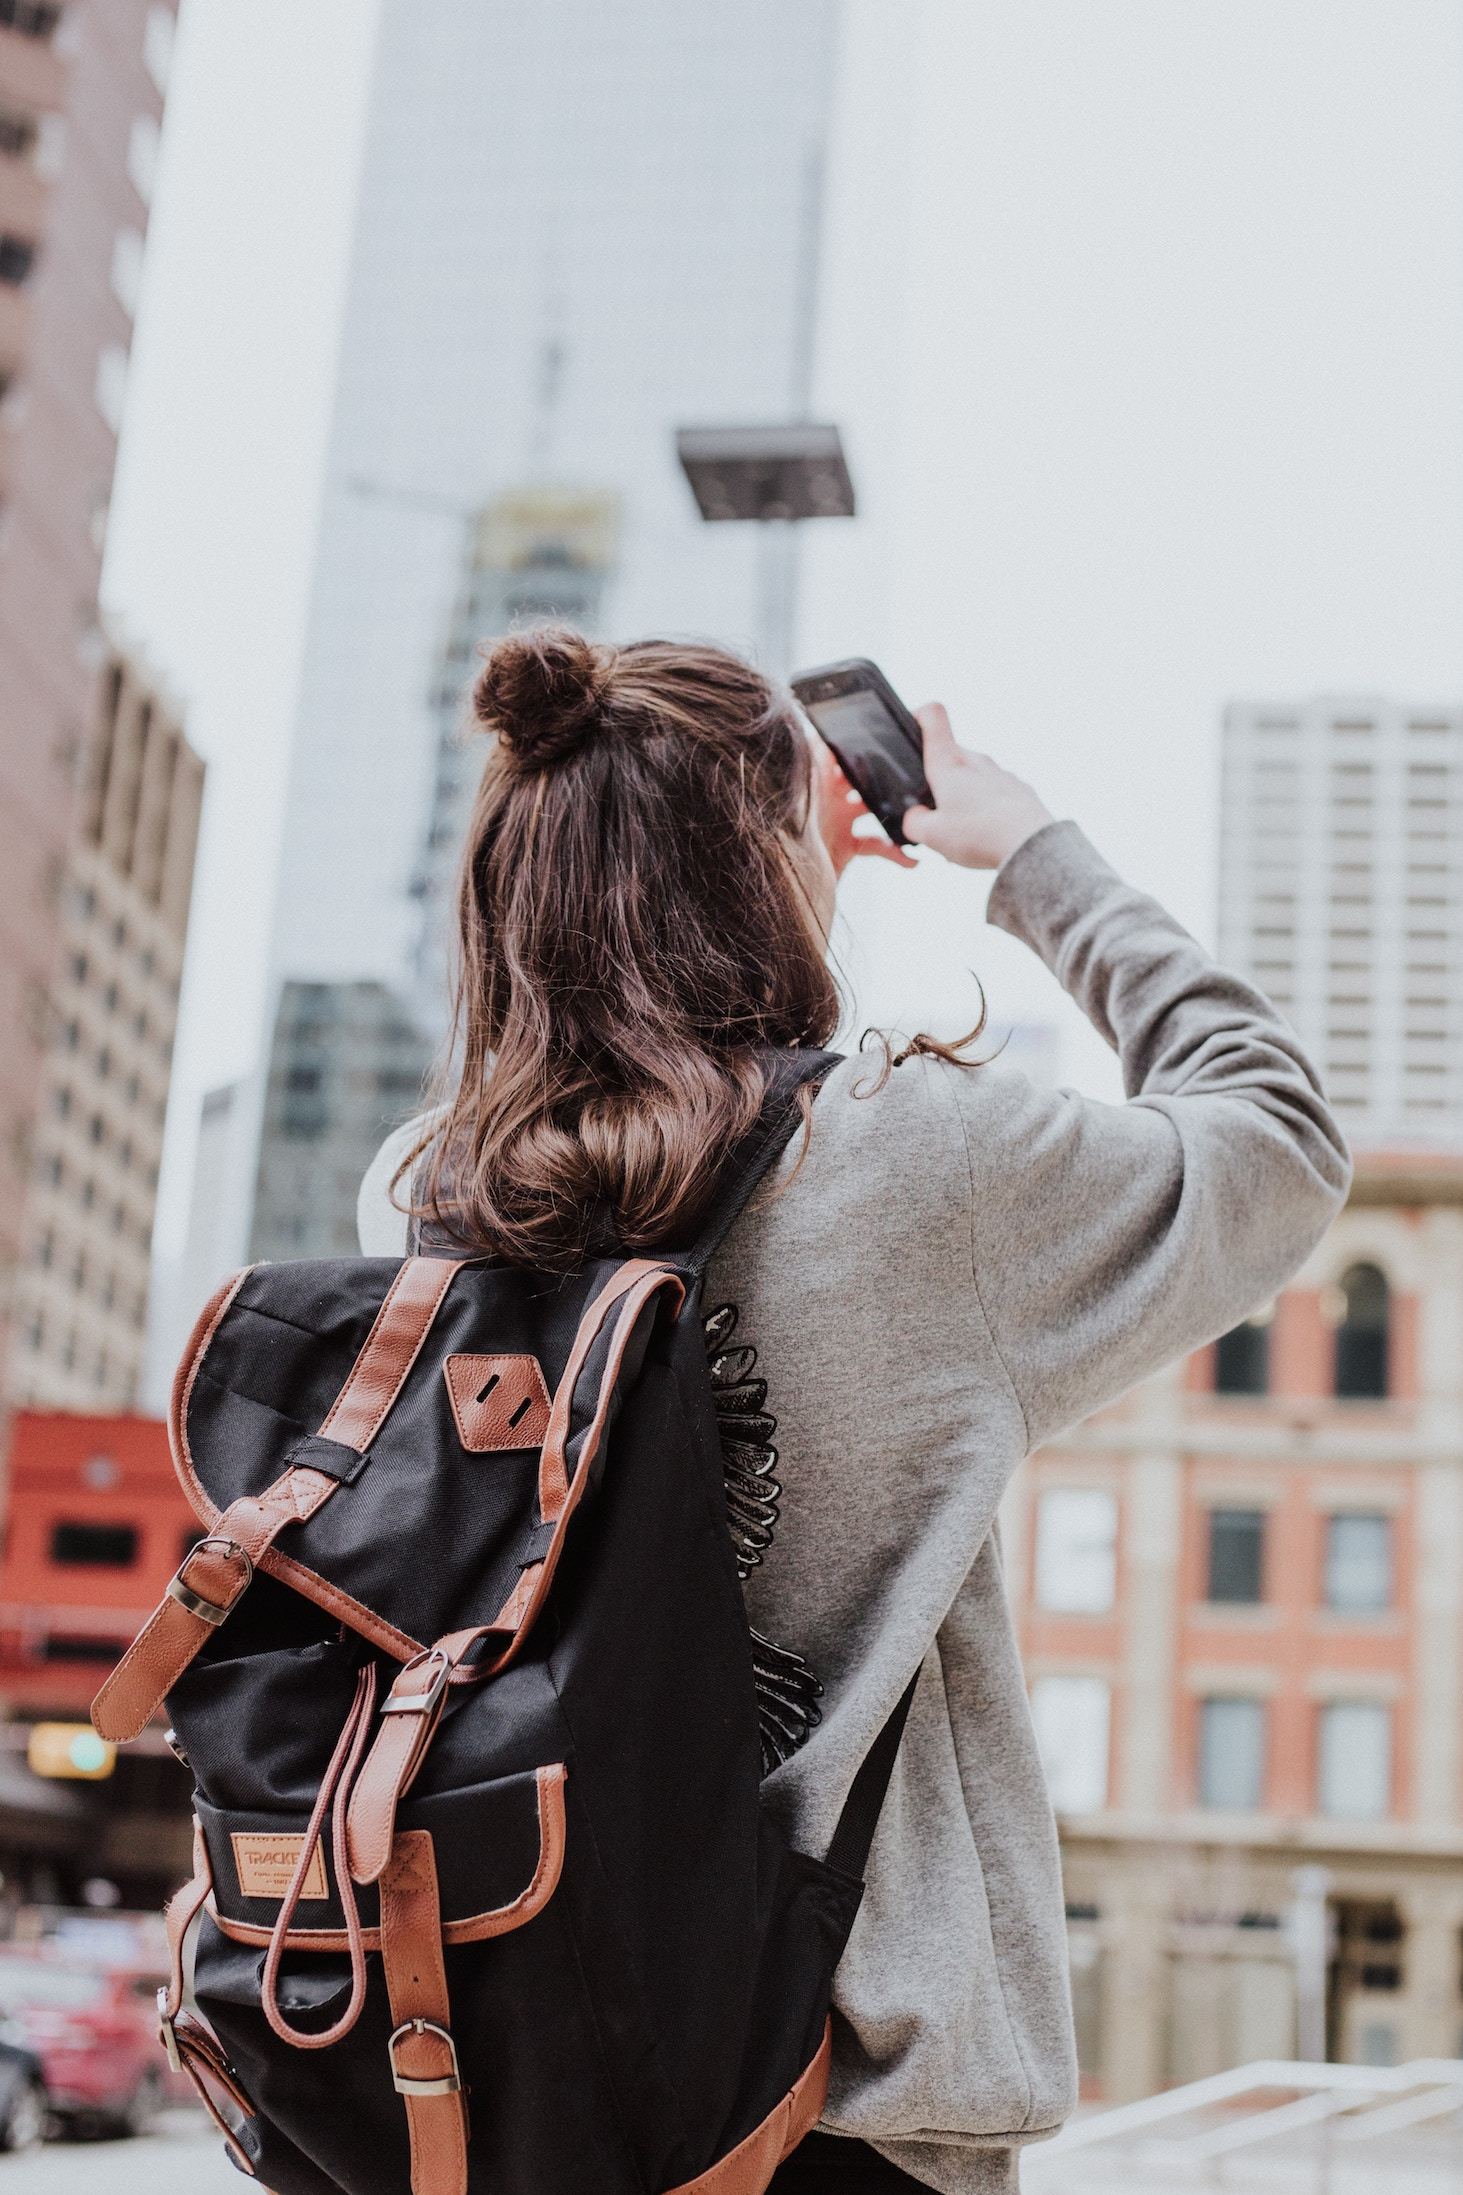 A young woman explores a city, taking pictures with her smartphone